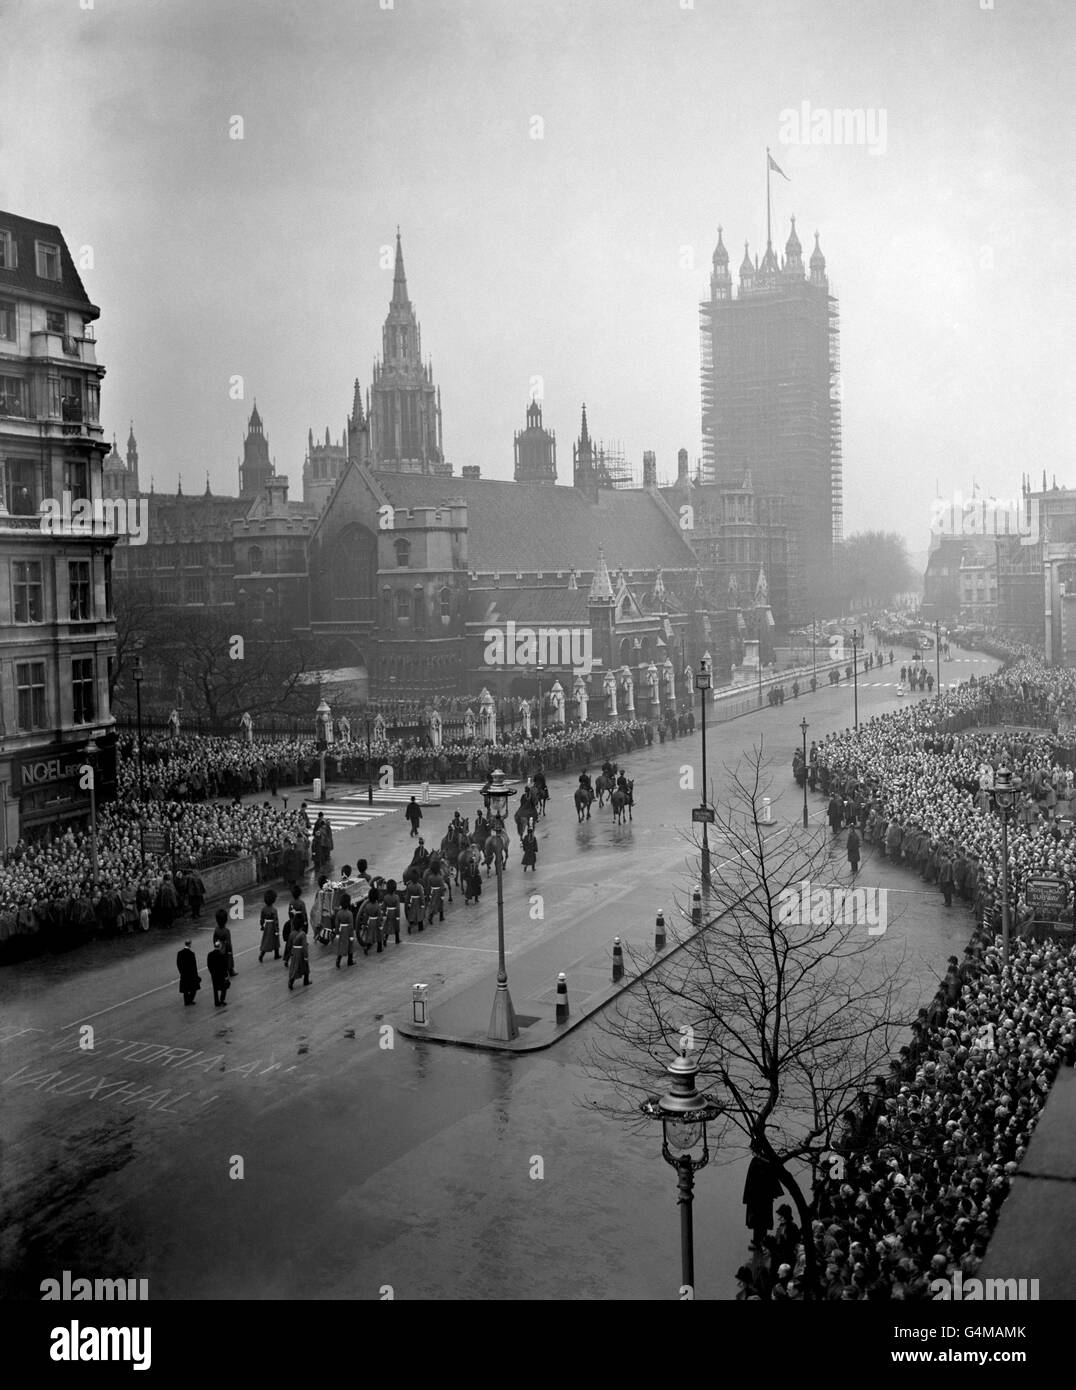 The cortege with the coffin of King George VI, about to enter New Palace Yard from Parliament Square, as it arrived at Westminster Hall to lie in State. The draped coffin, bearing the Queen Mother's wreath and the Imperial State Crown, was drawn on a gun-carriage by the King's Troop, Royal Horse Artillery. Stock Photo